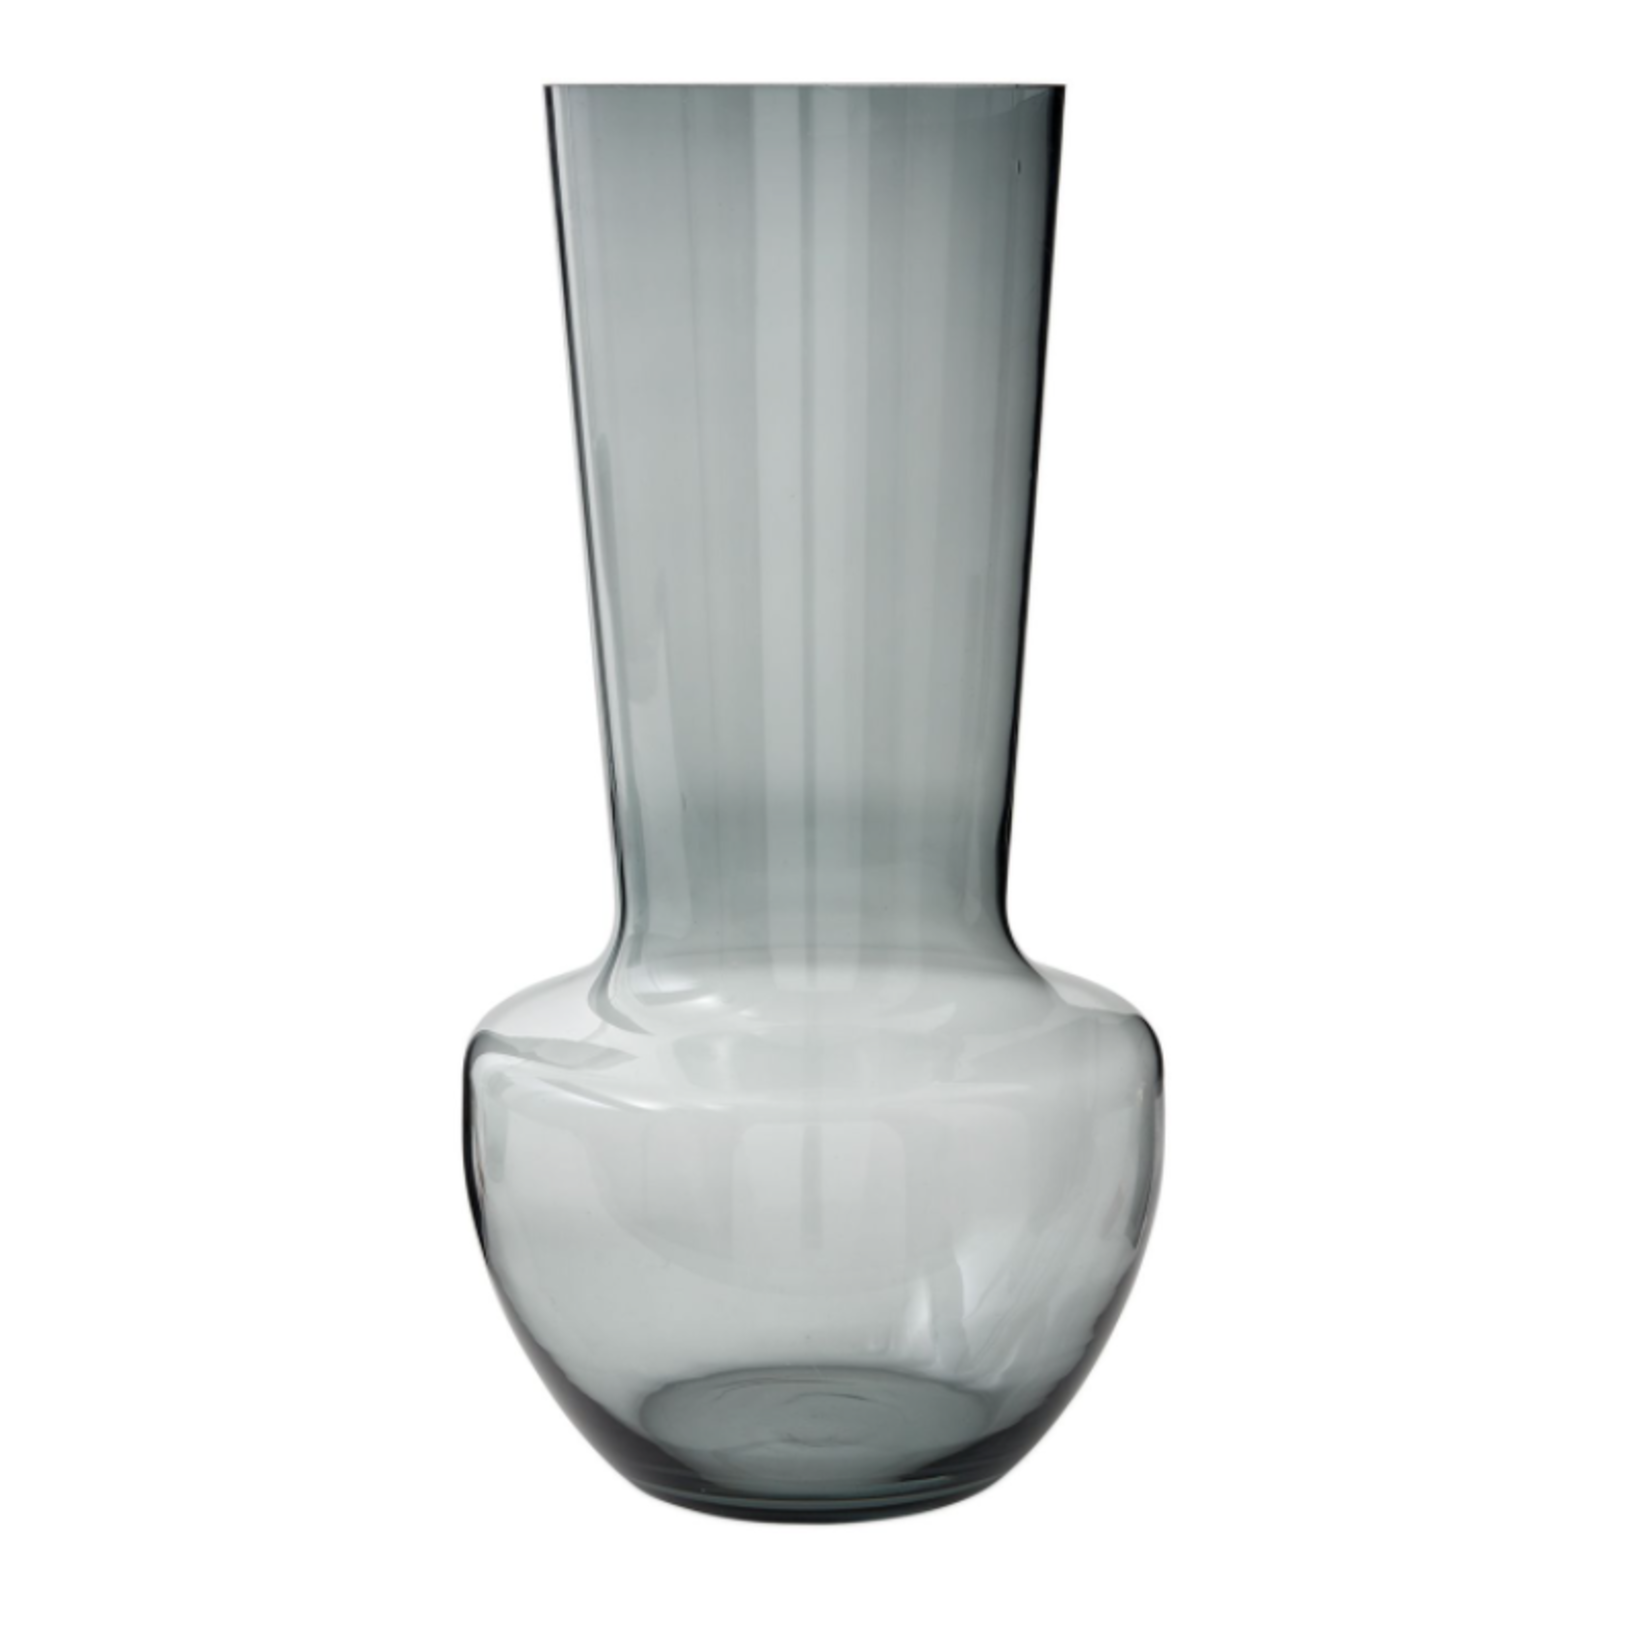 50% off was $75 now $37.49 19.5”H X 10.25”  SMOKE GLASS ENDEL VASE